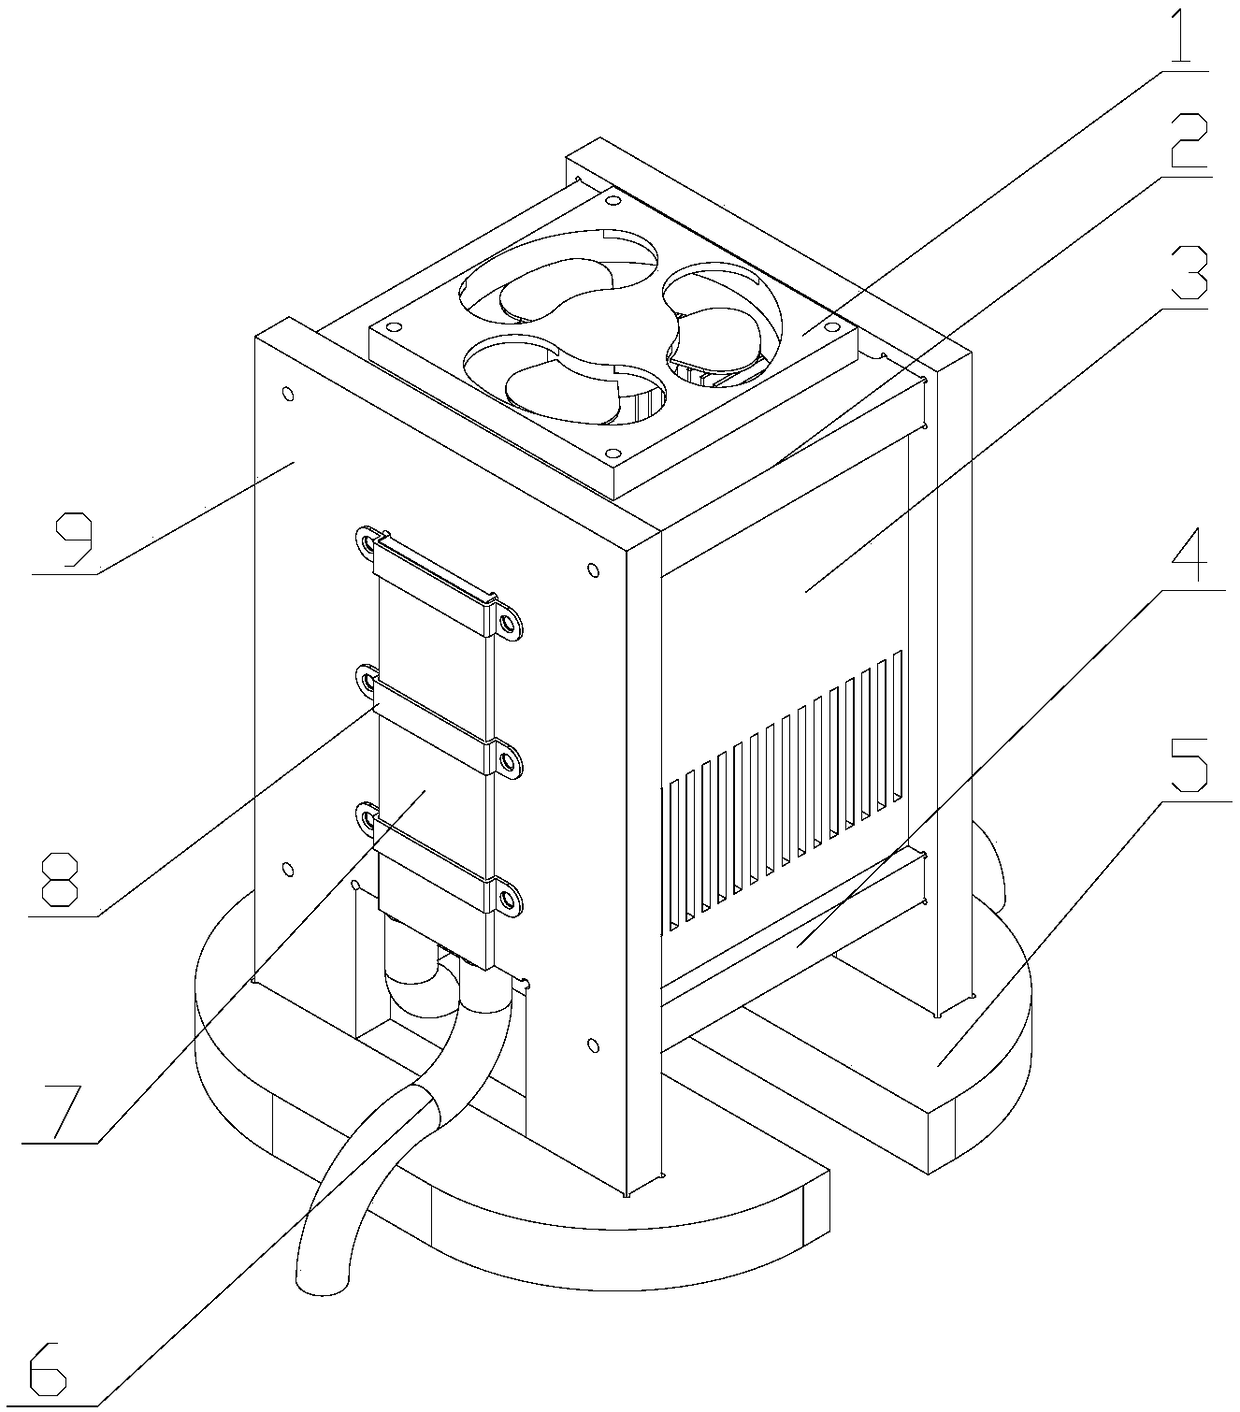 Condensation dehumidification device for control cabinet cooled by water cooling